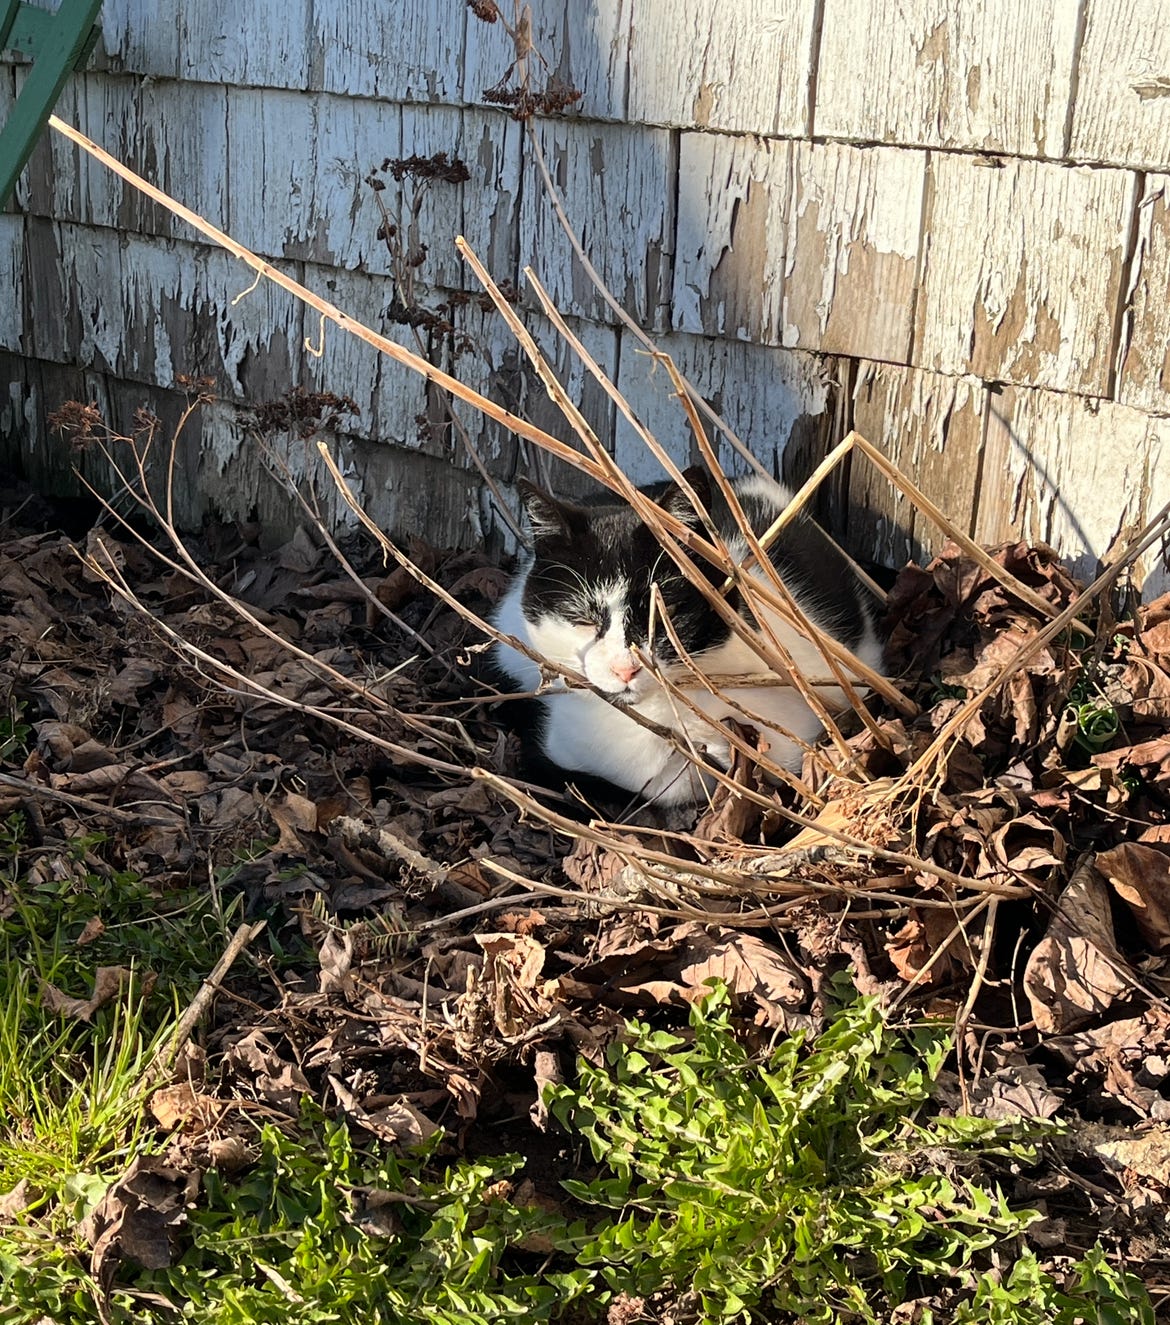 A black and white cat sits in a leaf pile with a beam of sunlight on her face